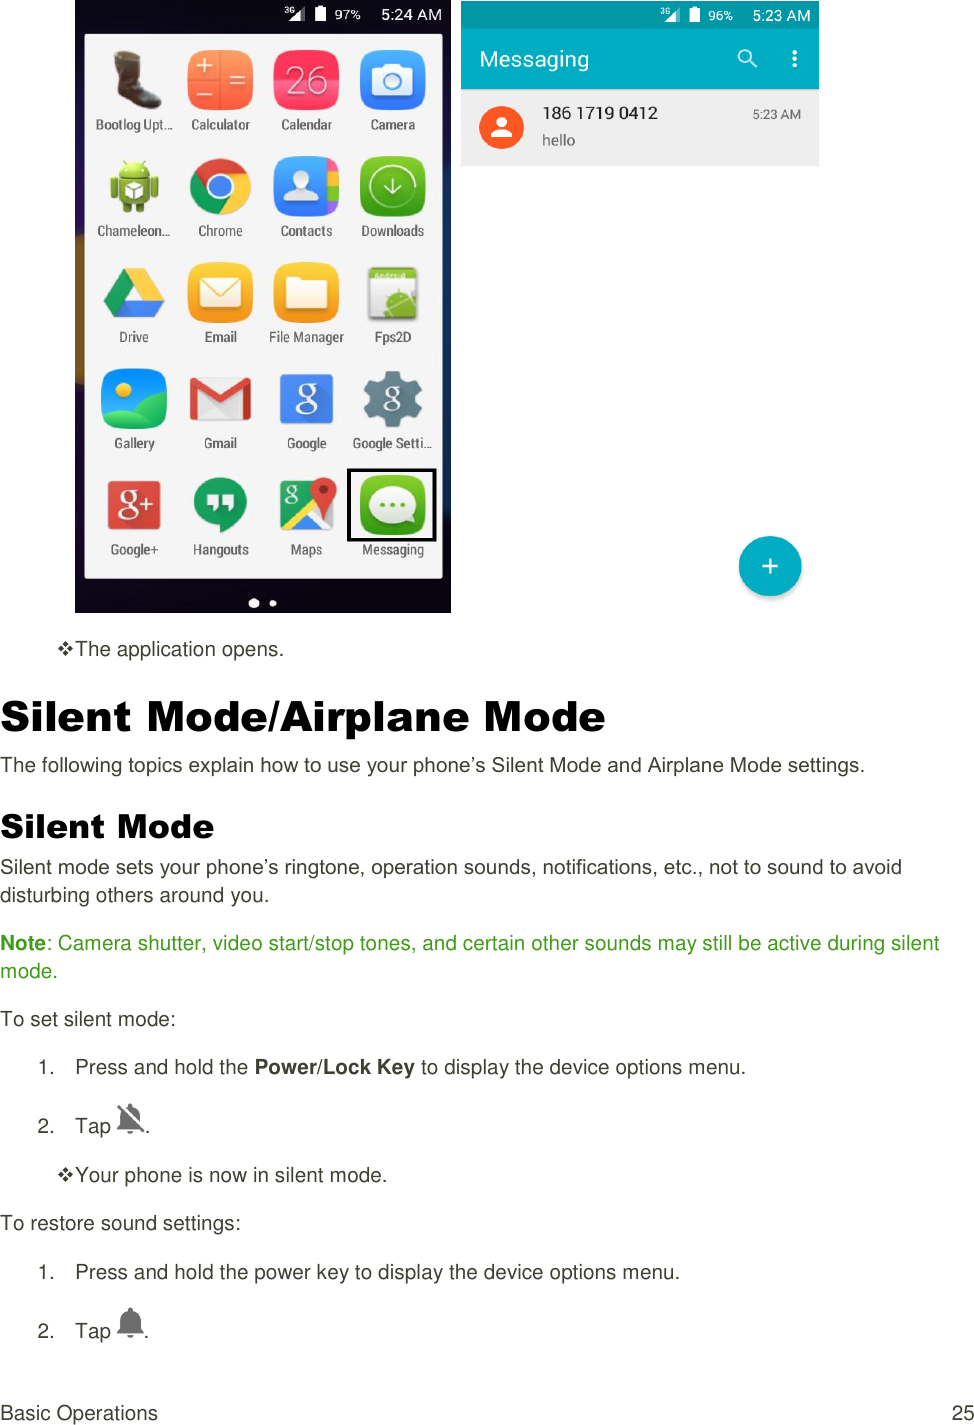 Basic Operations  25      The application opens. Silent Mode/Airplane Mode The following topics explain how to use your phone’s Silent Mode and Airplane Mode settings. Silent Mode Silent mode sets your phone’s ringtone, operation sounds, notifications, etc., not to sound to avoid disturbing others around you. Note: Camera shutter, video start/stop tones, and certain other sounds may still be active during silent mode. To set silent mode: 1.  Press and hold the Power/Lock Key to display the device options menu. 2.  Tap  .  Your phone is now in silent mode. To restore sound settings: 1.  Press and hold the power key to display the device options menu. 2.  Tap  . 